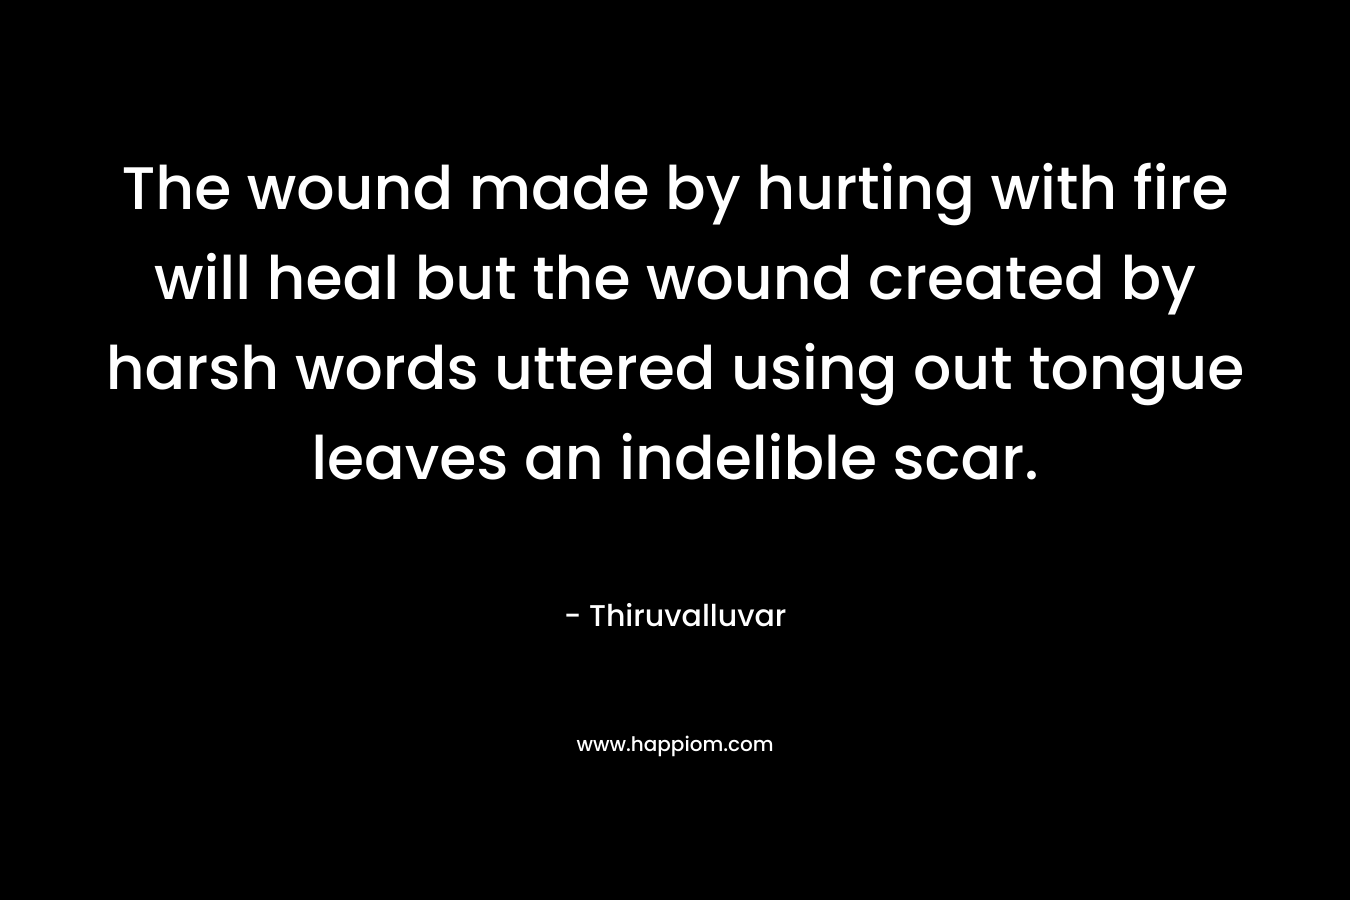 The wound made by hurting with fire will heal but the wound created by harsh words uttered using out tongue leaves an indelible scar. – Thiruvalluvar